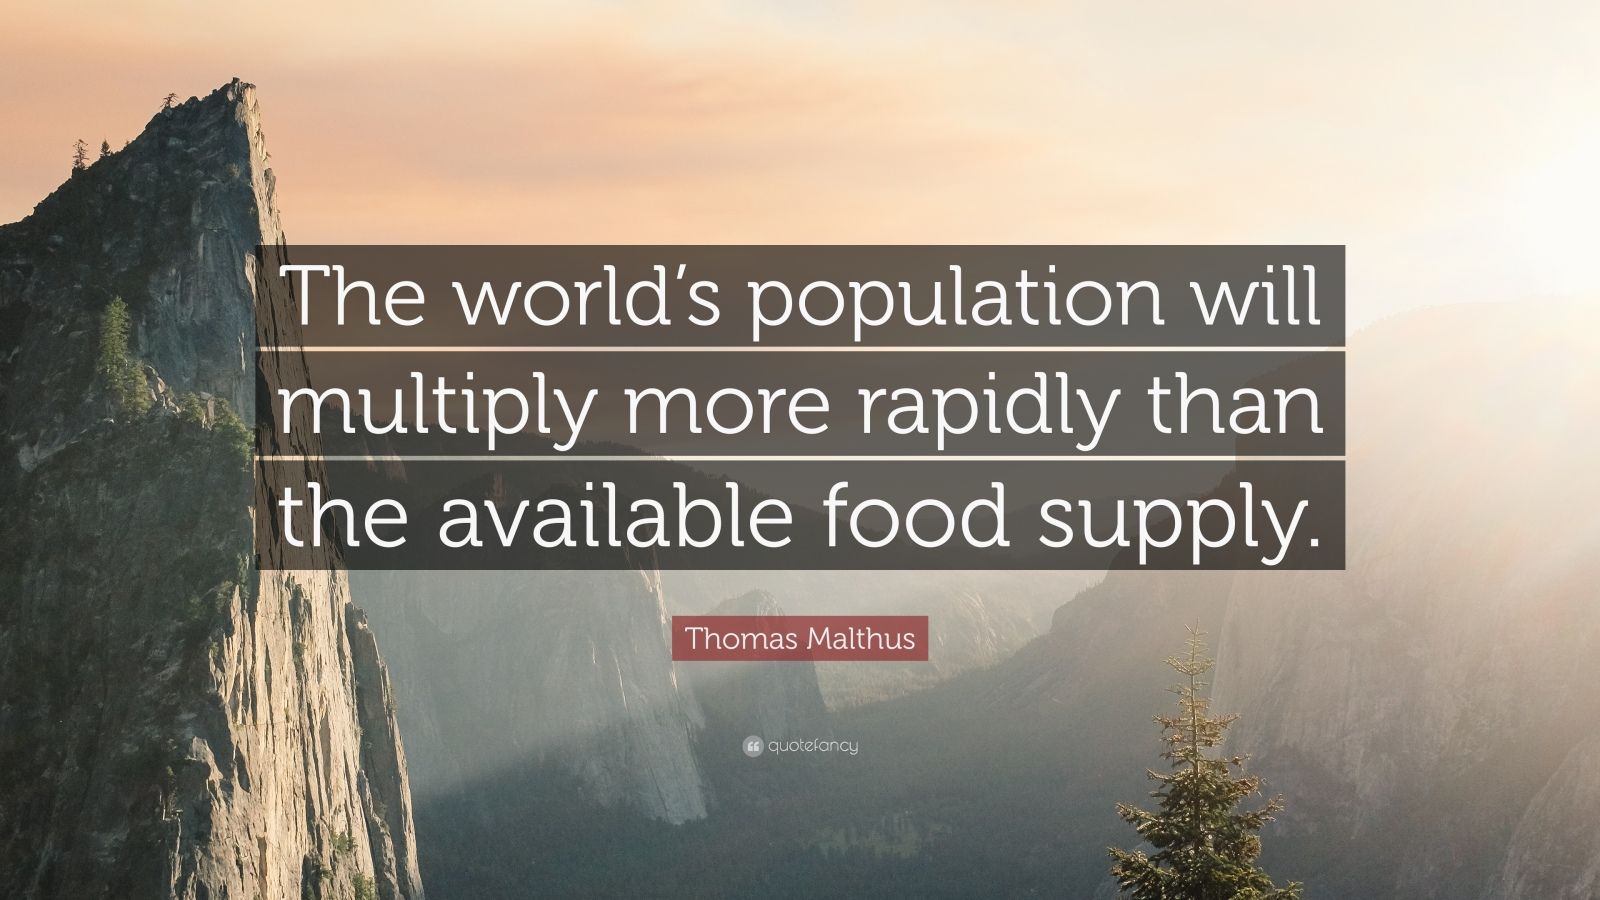 Thomas Malthus Quote: “The world’s population will multiply more